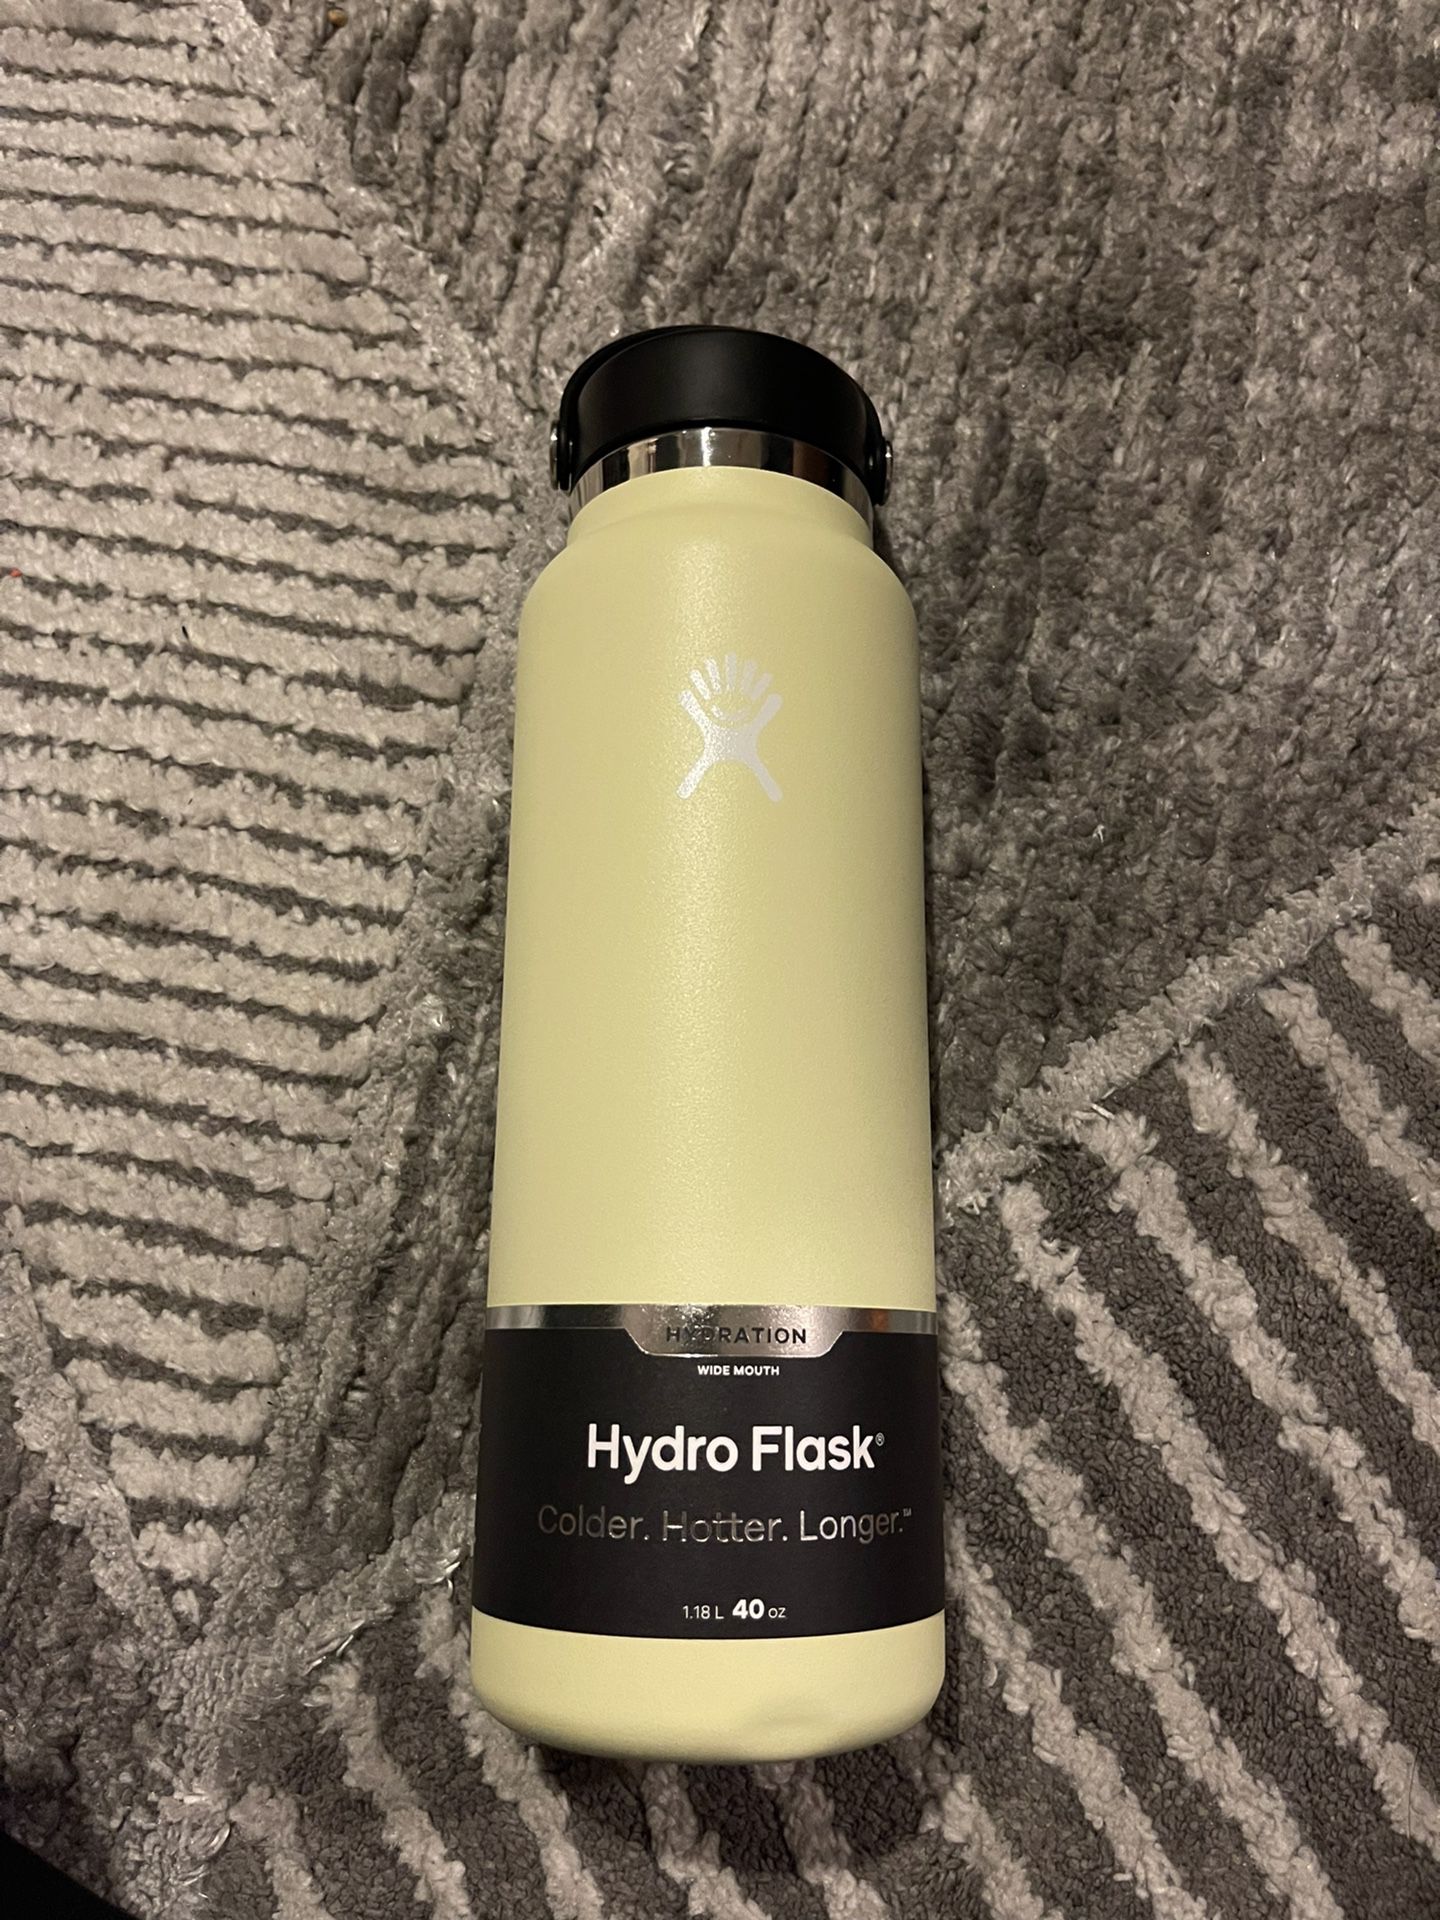 Brand New Limited Edition 40 ounce Hydro Flask for Sale in Glendale, AZ -  OfferUp